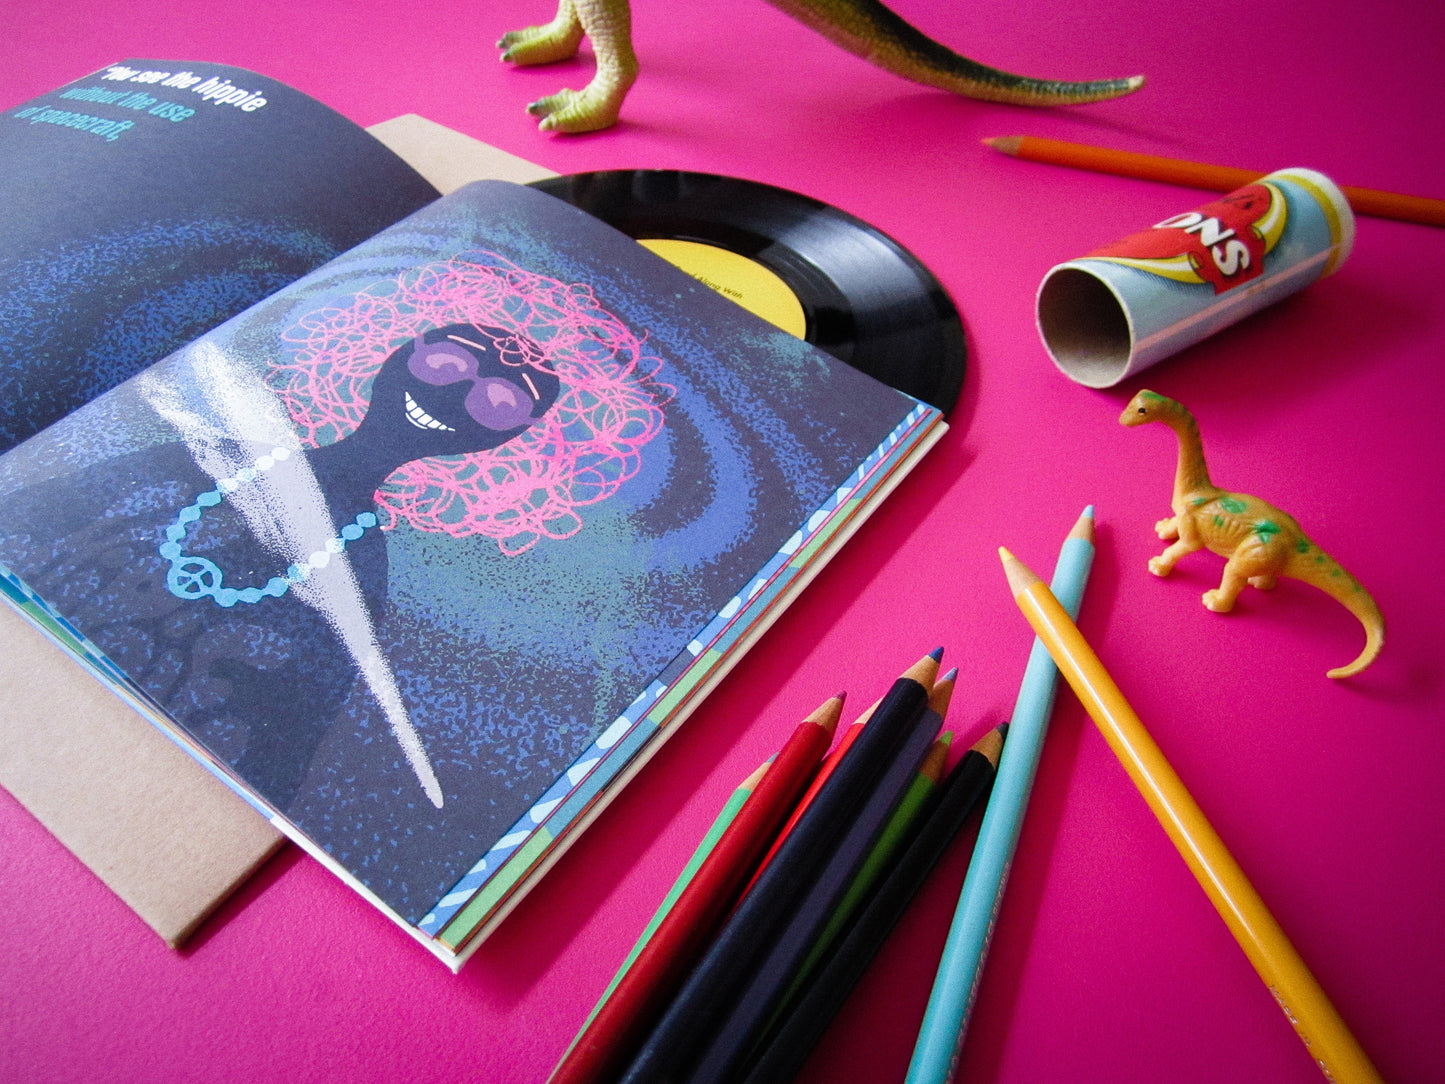 'What Did The Hippie Have In His Bag?' – read along book vinyl by Cornershop